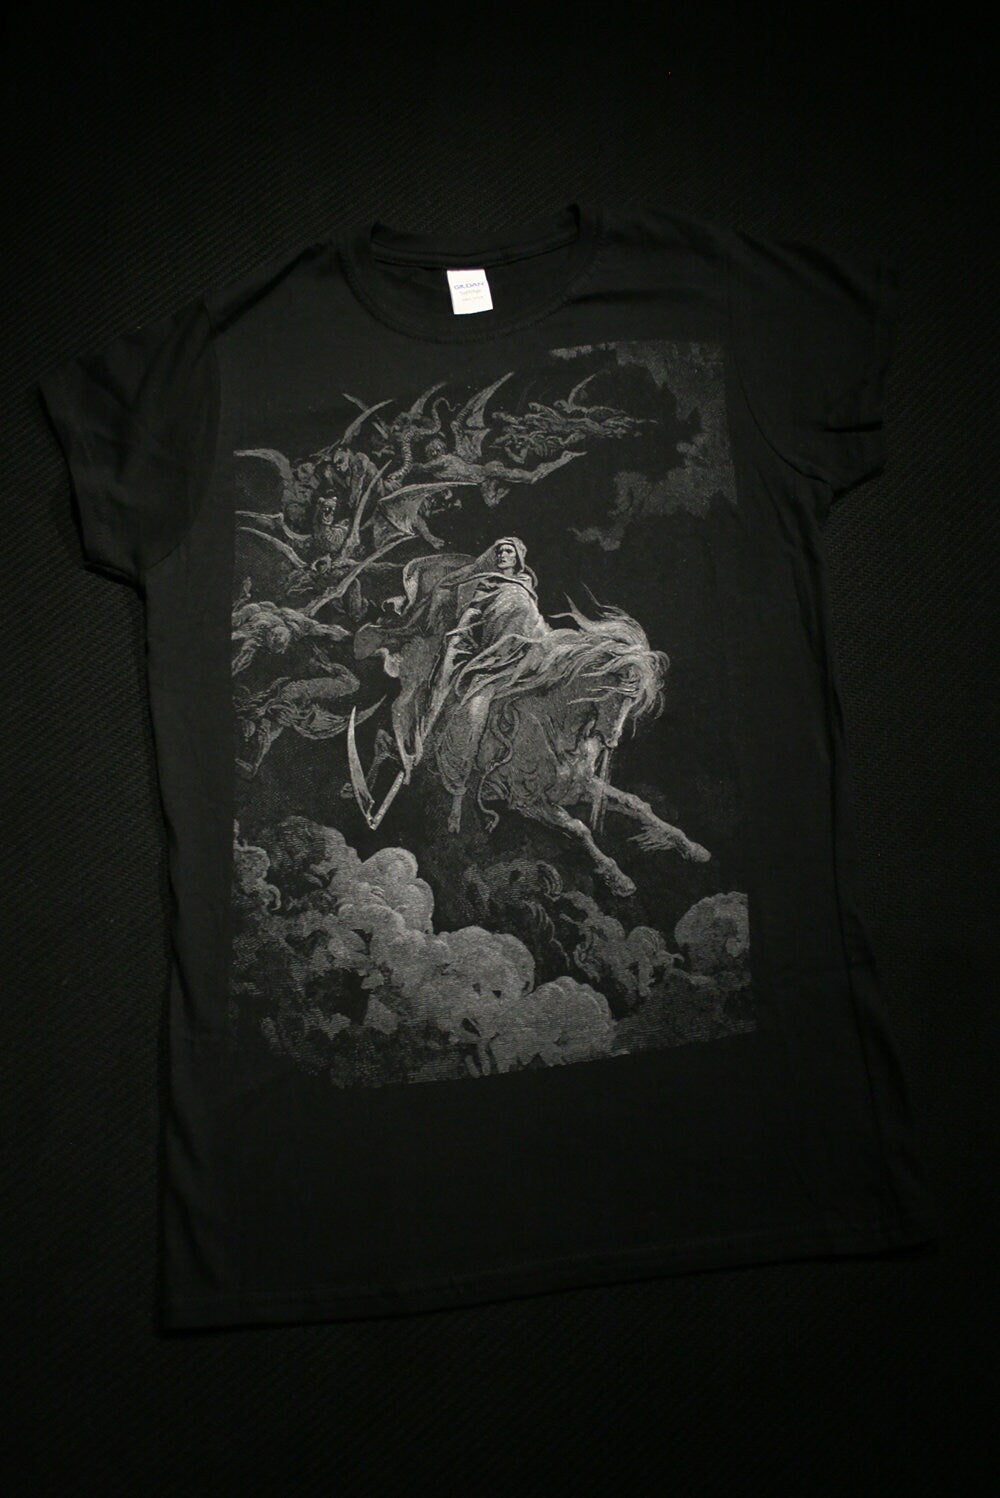 DEATH, Gustave Dore illustration - T-shirt female fitted